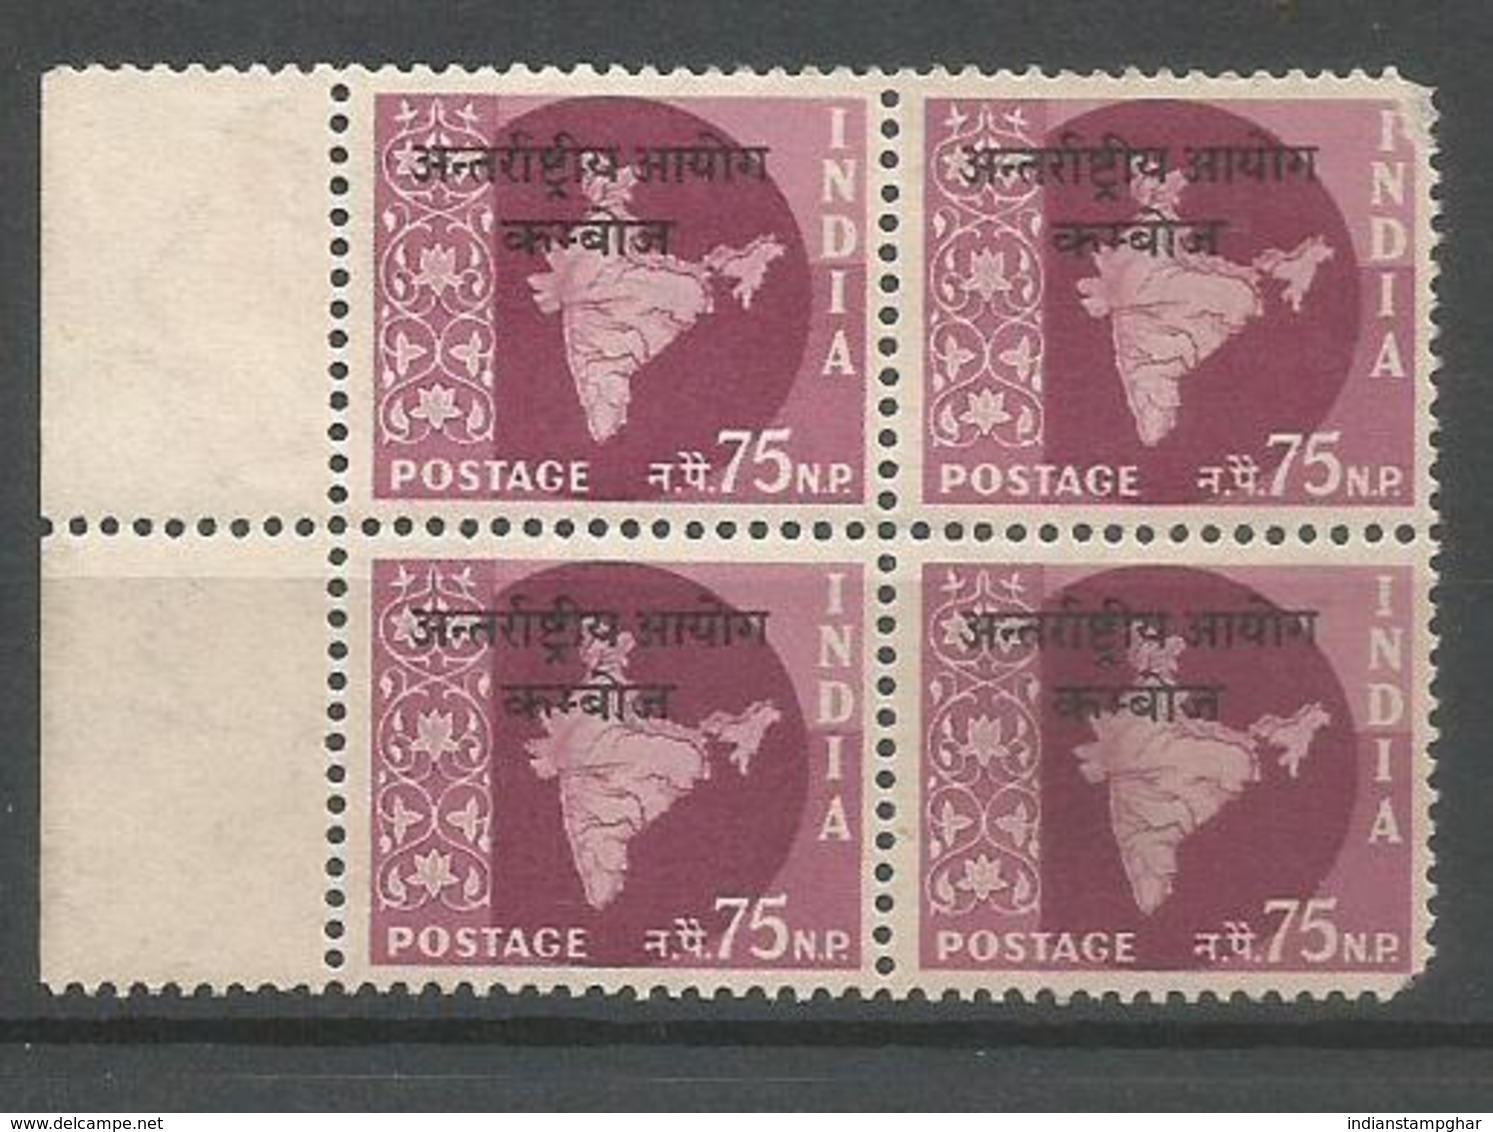 Cambodia Opvt. On 75np Map, Block Of 4,MNH 1962 Star Wmk, Military Stamps, As Per Scan - Franquicia Militar